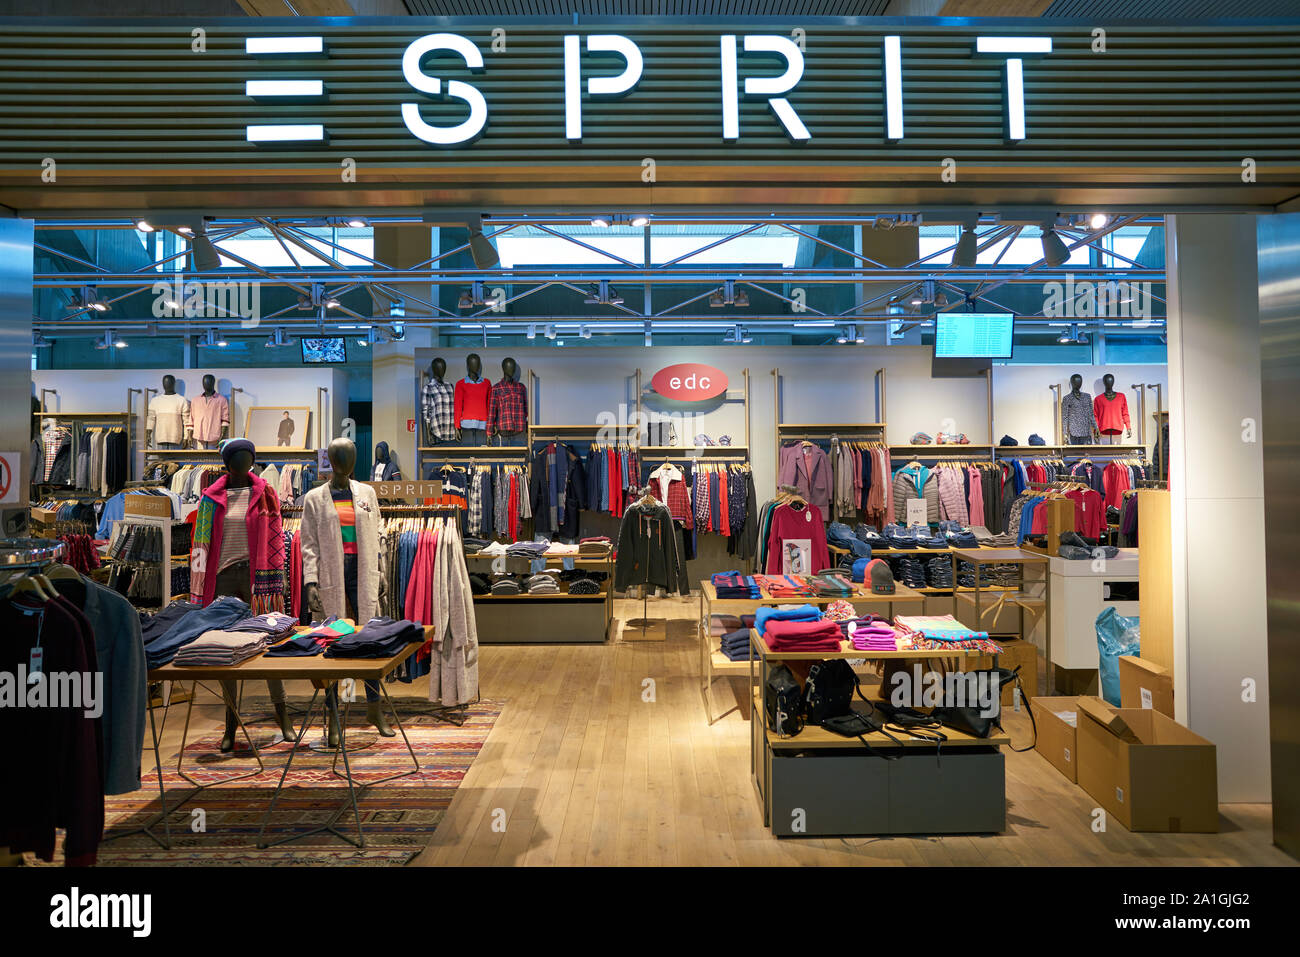 COLOGNE, GERMANY - CIRCA OCTOBER, 2018: Esprit brand name over a shop  entrance in Cologne Bonn Airport Stock Photo - Alamy